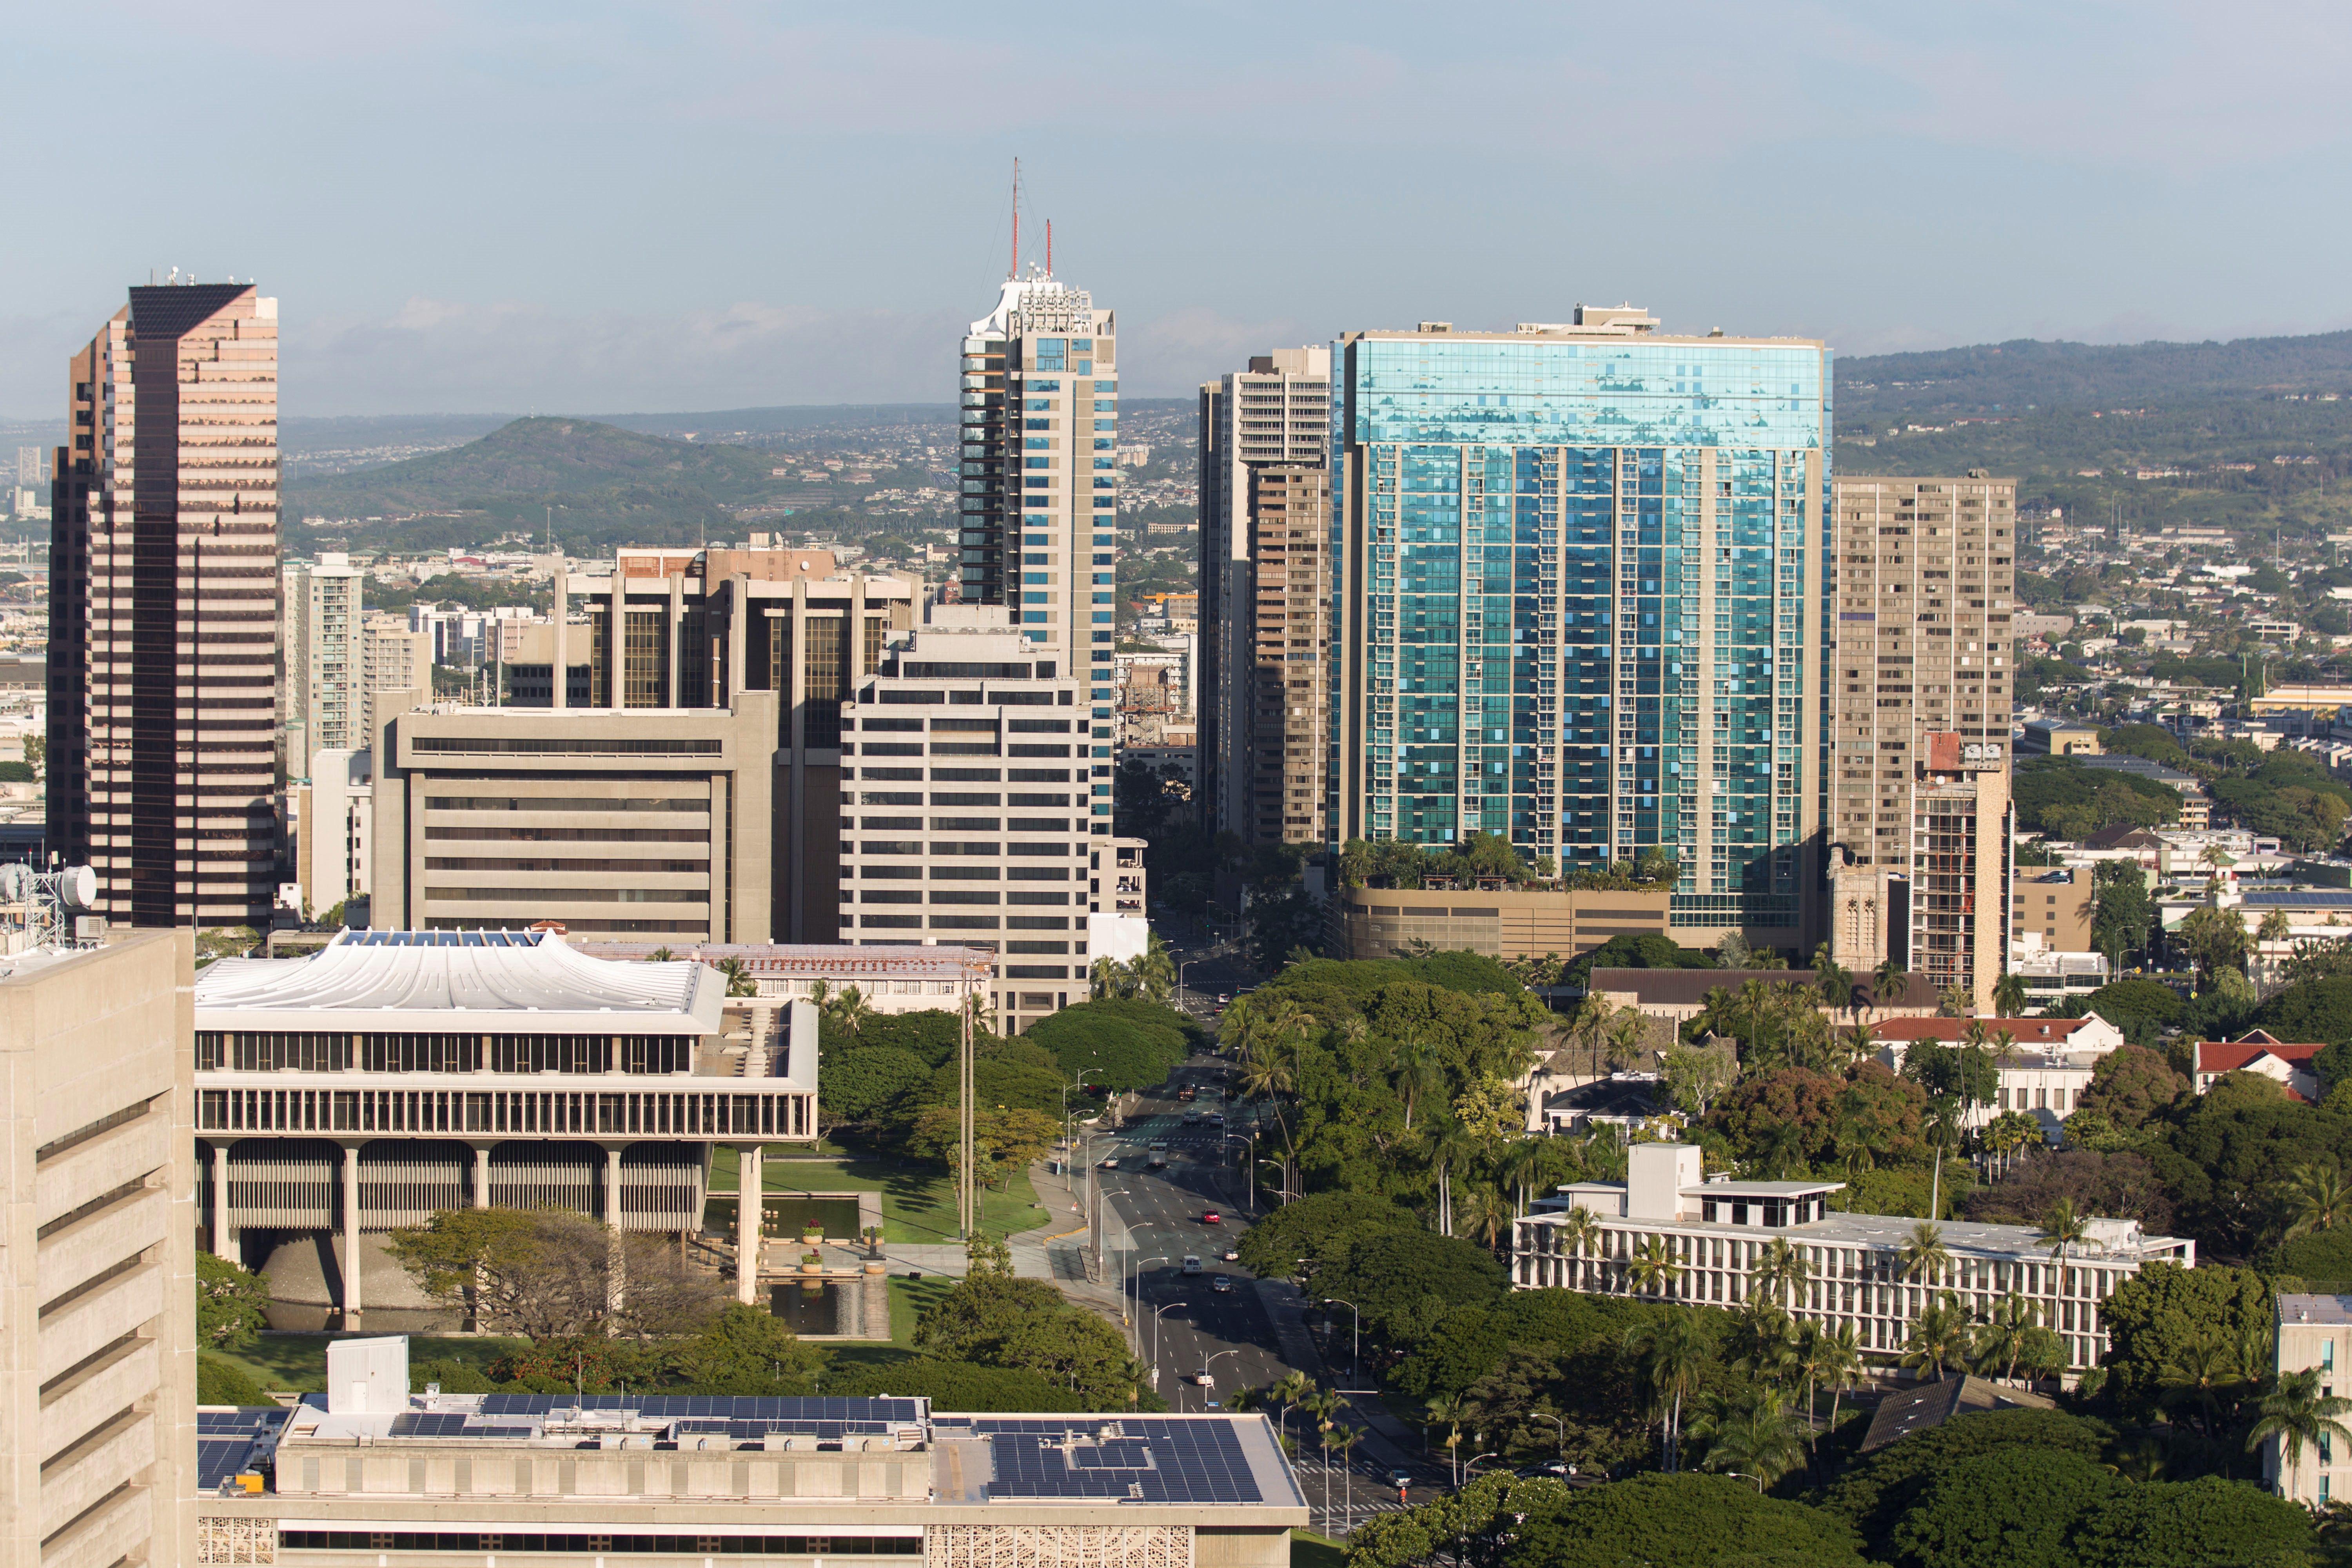 A morning view of the city of Honolulu, Hawaii is seen on January 13, 2018. 